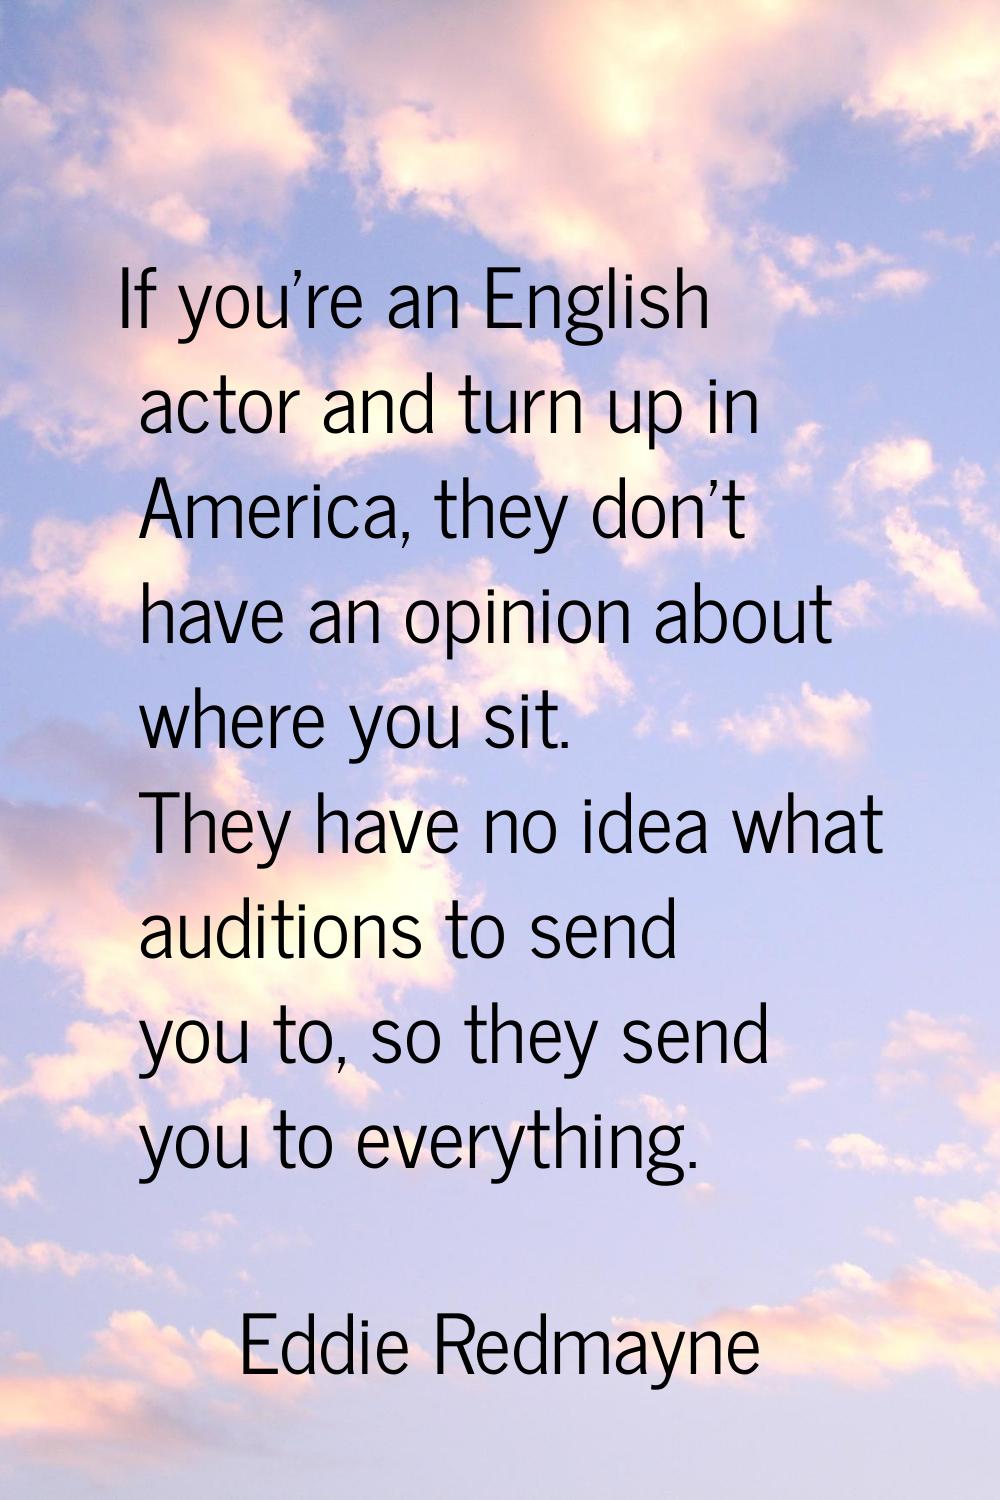 If you're an English actor and turn up in America, they don't have an opinion about where you sit. 